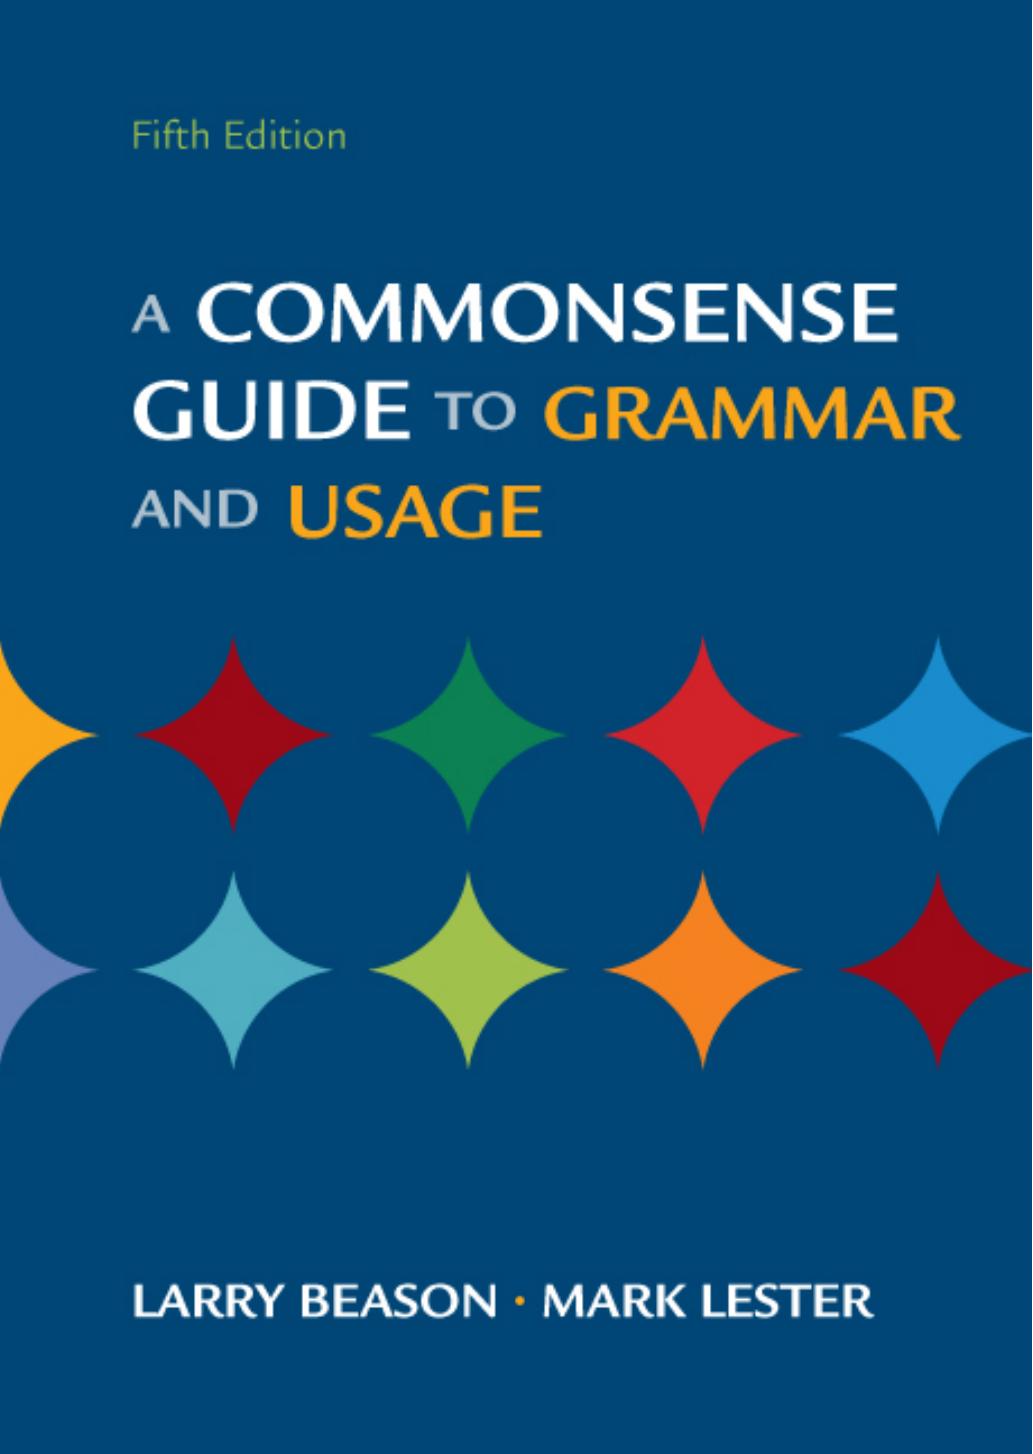 A Commonsense Guide to Grammar and Usage